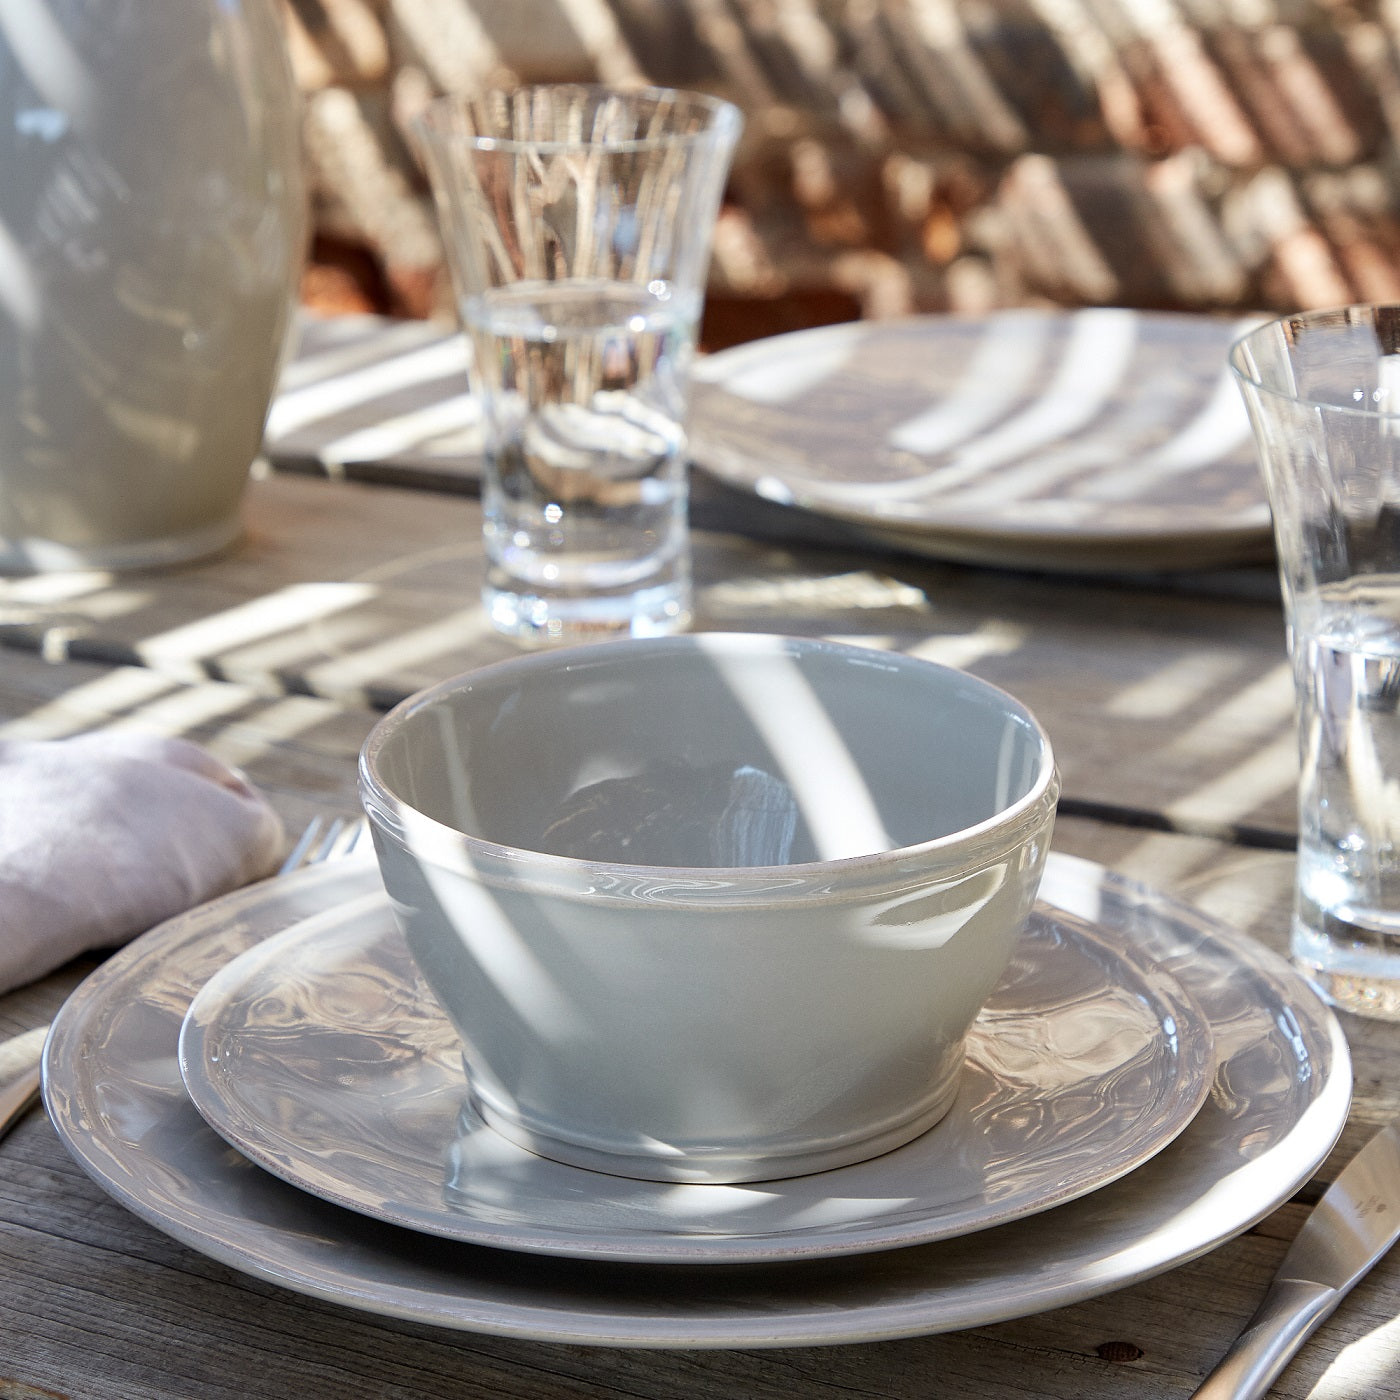 Stack of pearly white dinnerware on an outside dining table, including dinner plate, side plate, and cereal bowl.